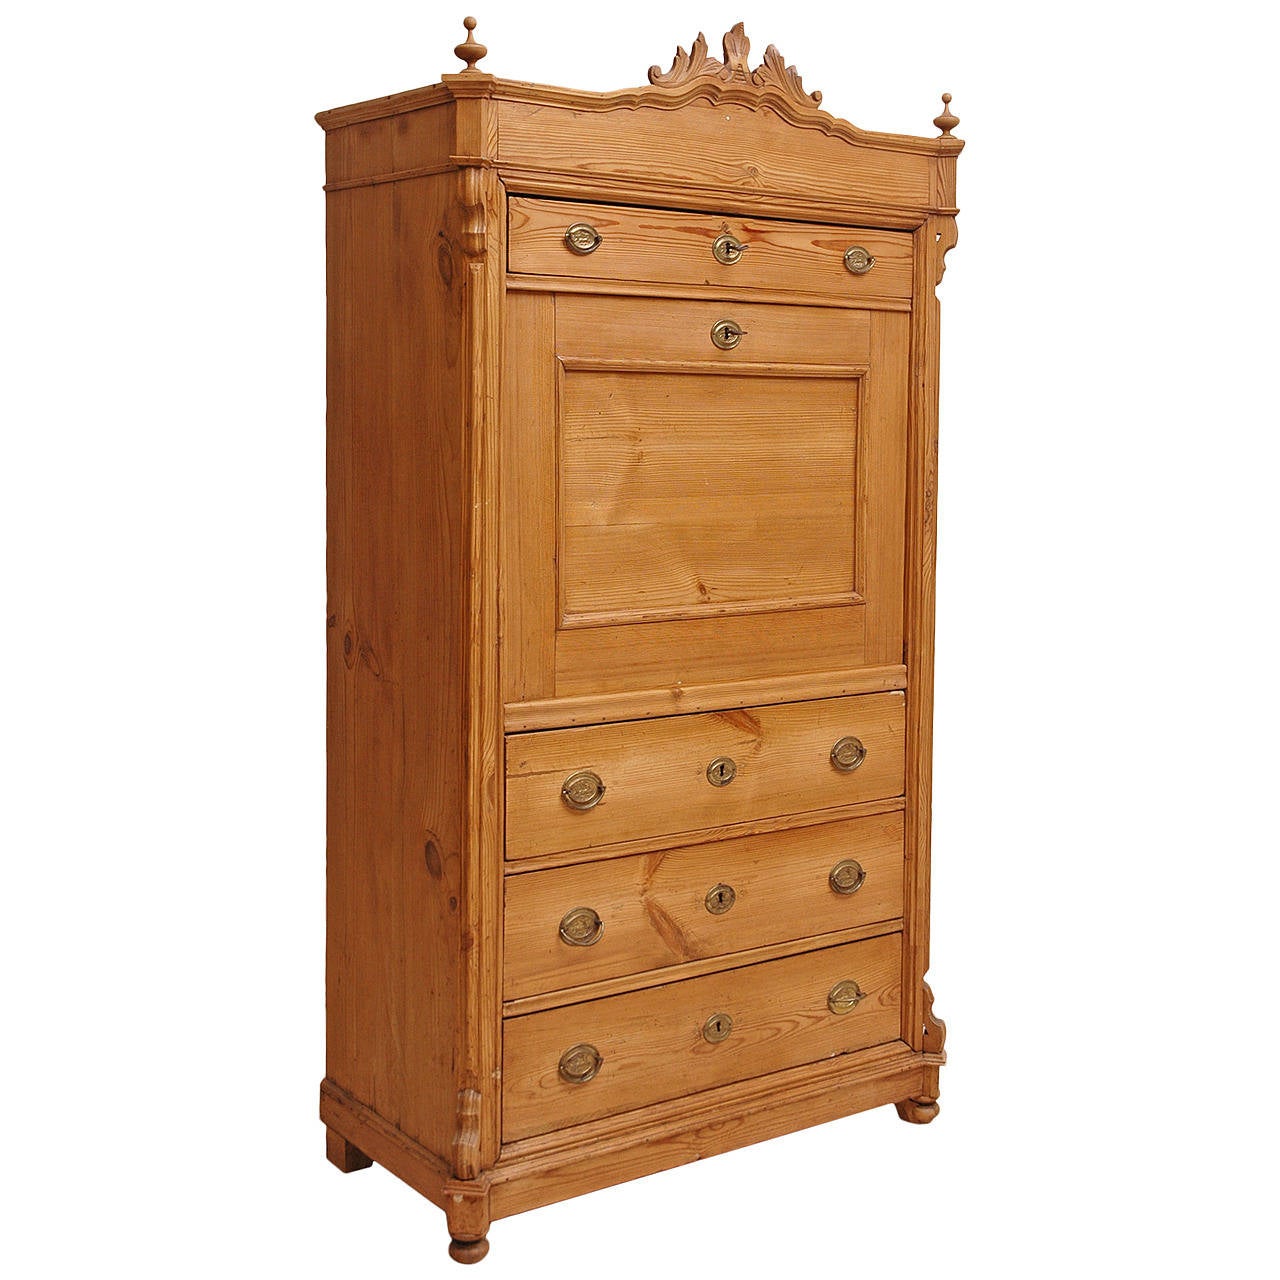 A lovely secretary in pine with four exterior drawers and fall-front opening to a series of smaller desk drawers and open cubby hole. With original carved foliate bonnet and finials.
Measures: 38 1/2